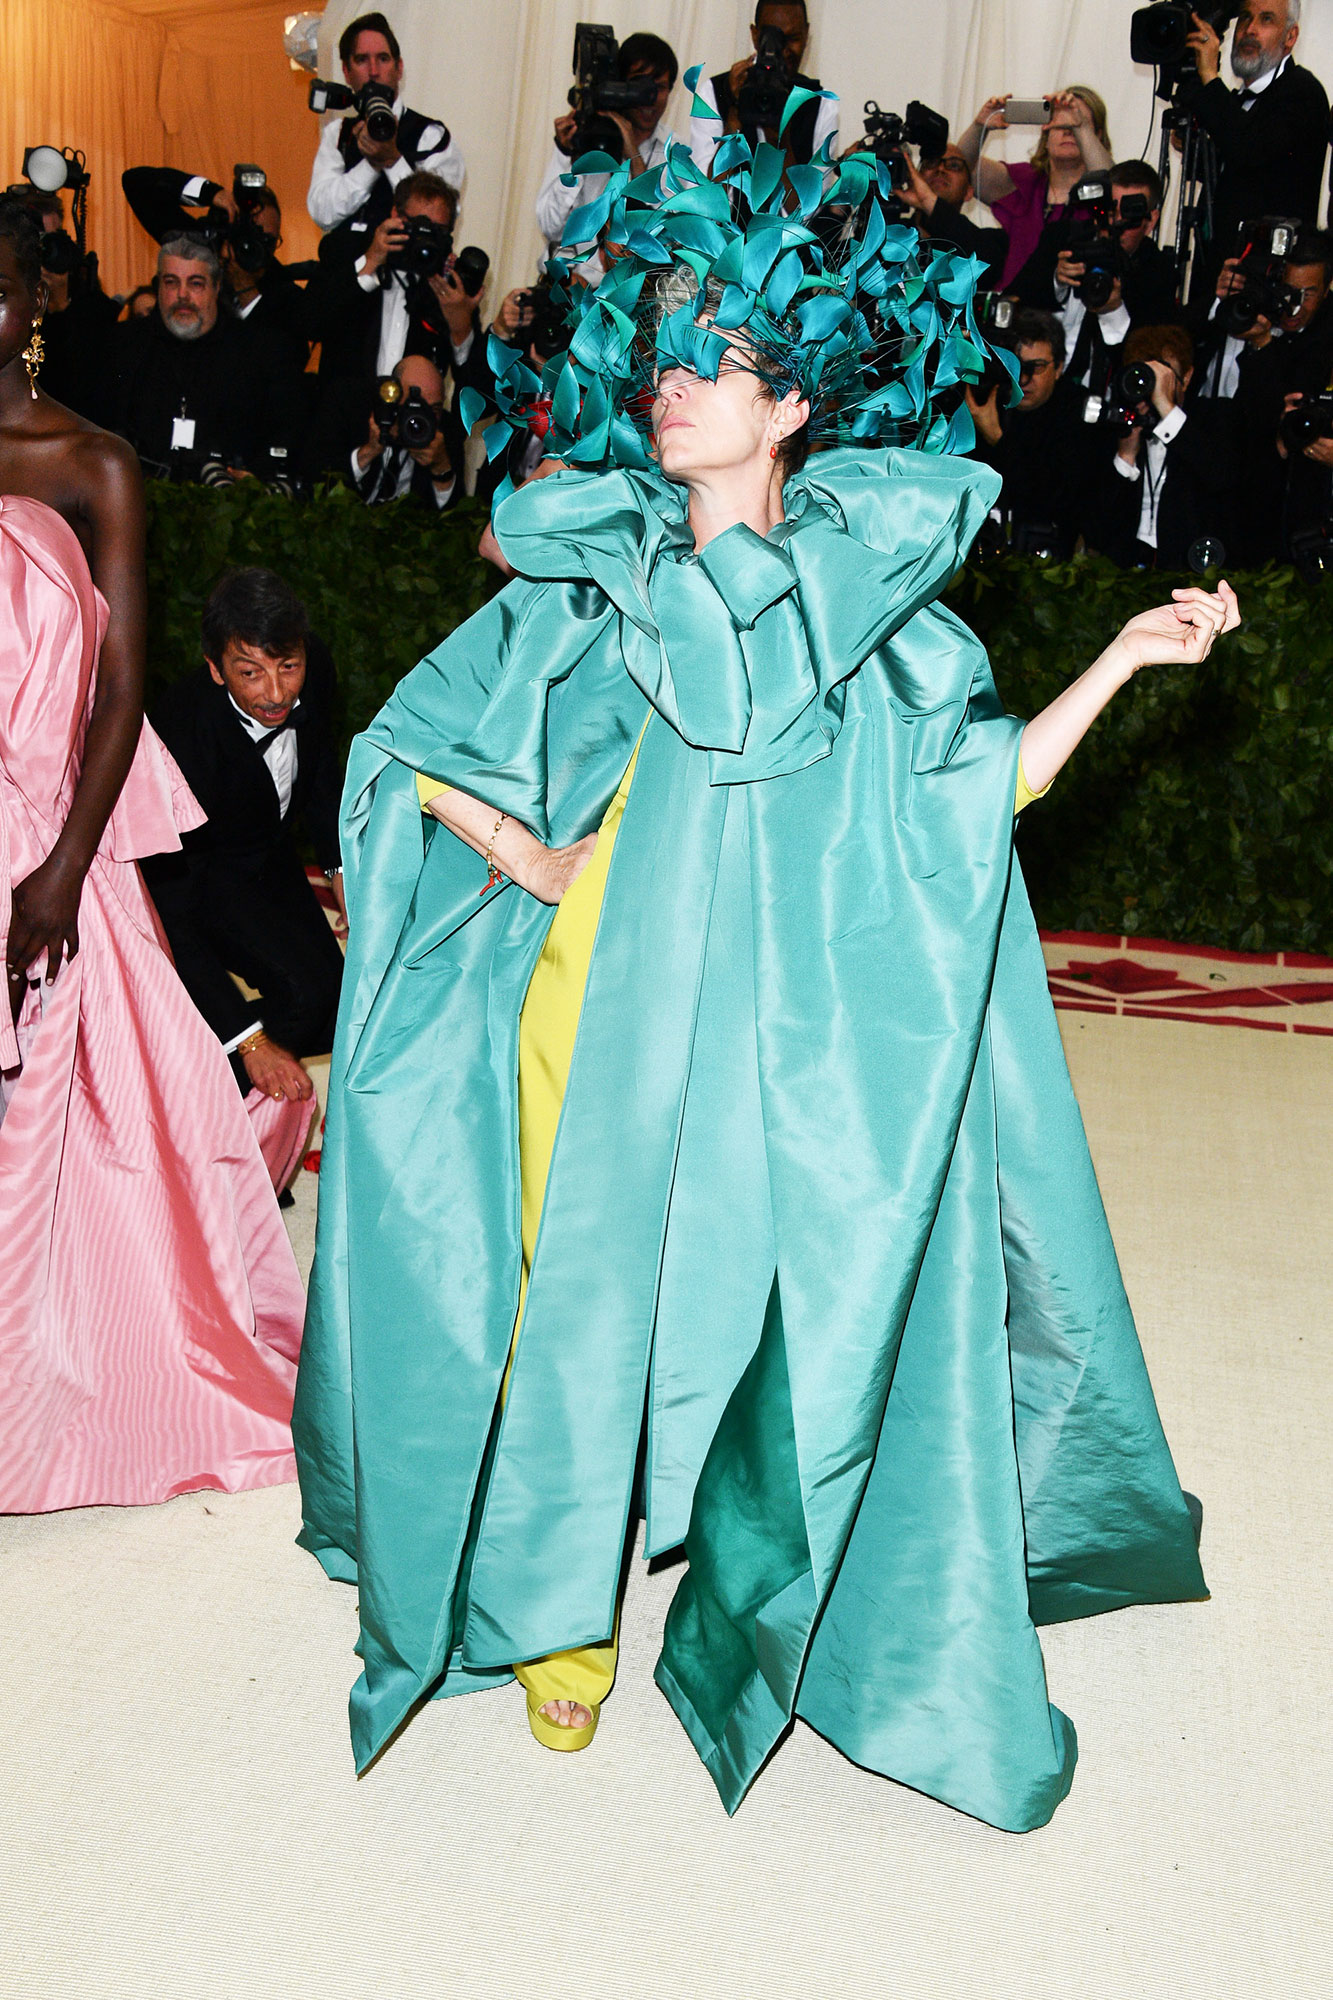 Frances McDormand The Wild Met Gala Red Carpet Fashion Looks We Can't Stop Thinking About